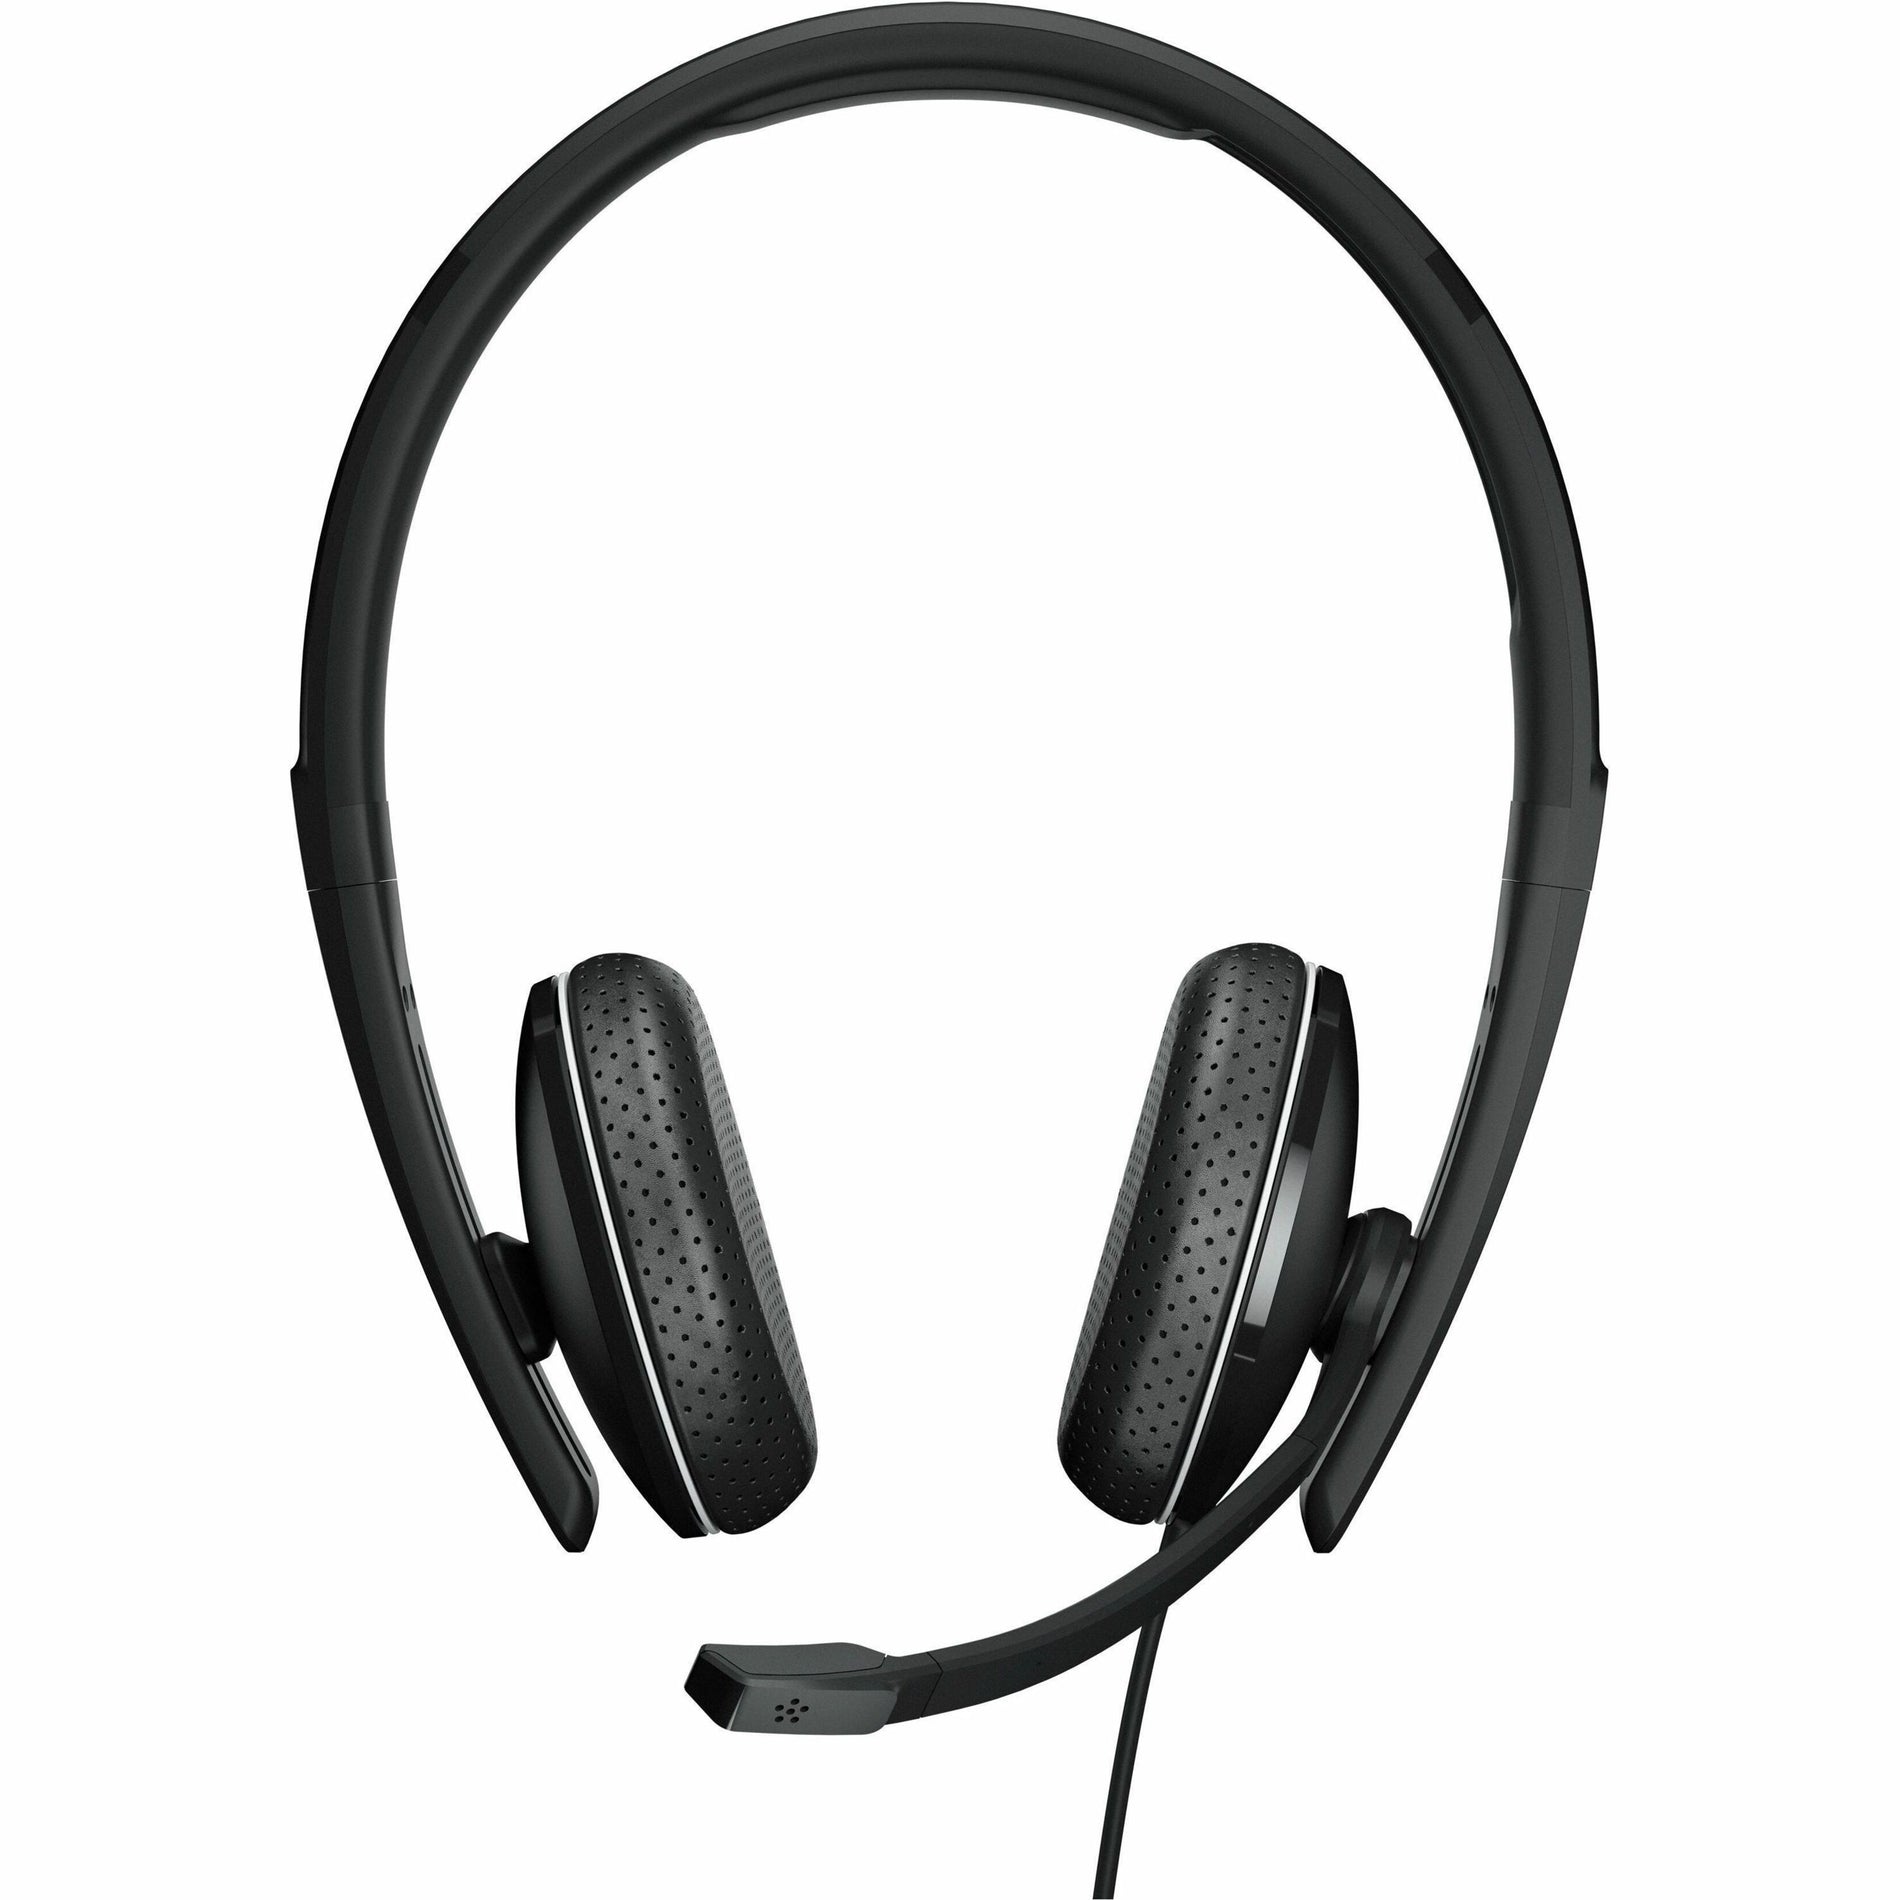 EPOS | SENNHEISER 1000920 ADAPT 165 USB-C II Headset Binaural On-ear Headset with 2 Year Warranty Integrated Microphone Mobile Devices Compatibility